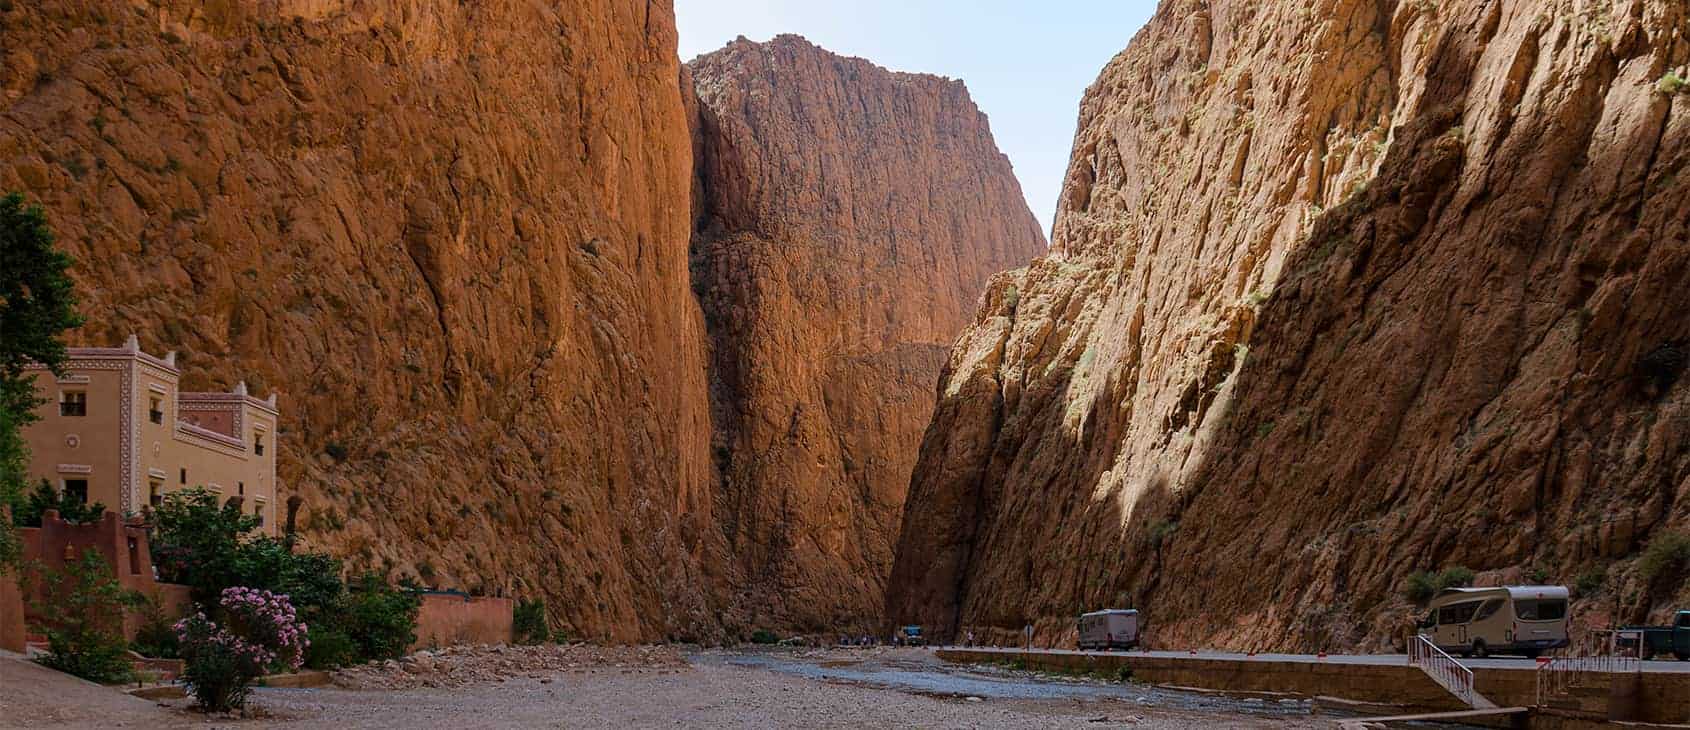 Dizzying crags of Todra Gorge